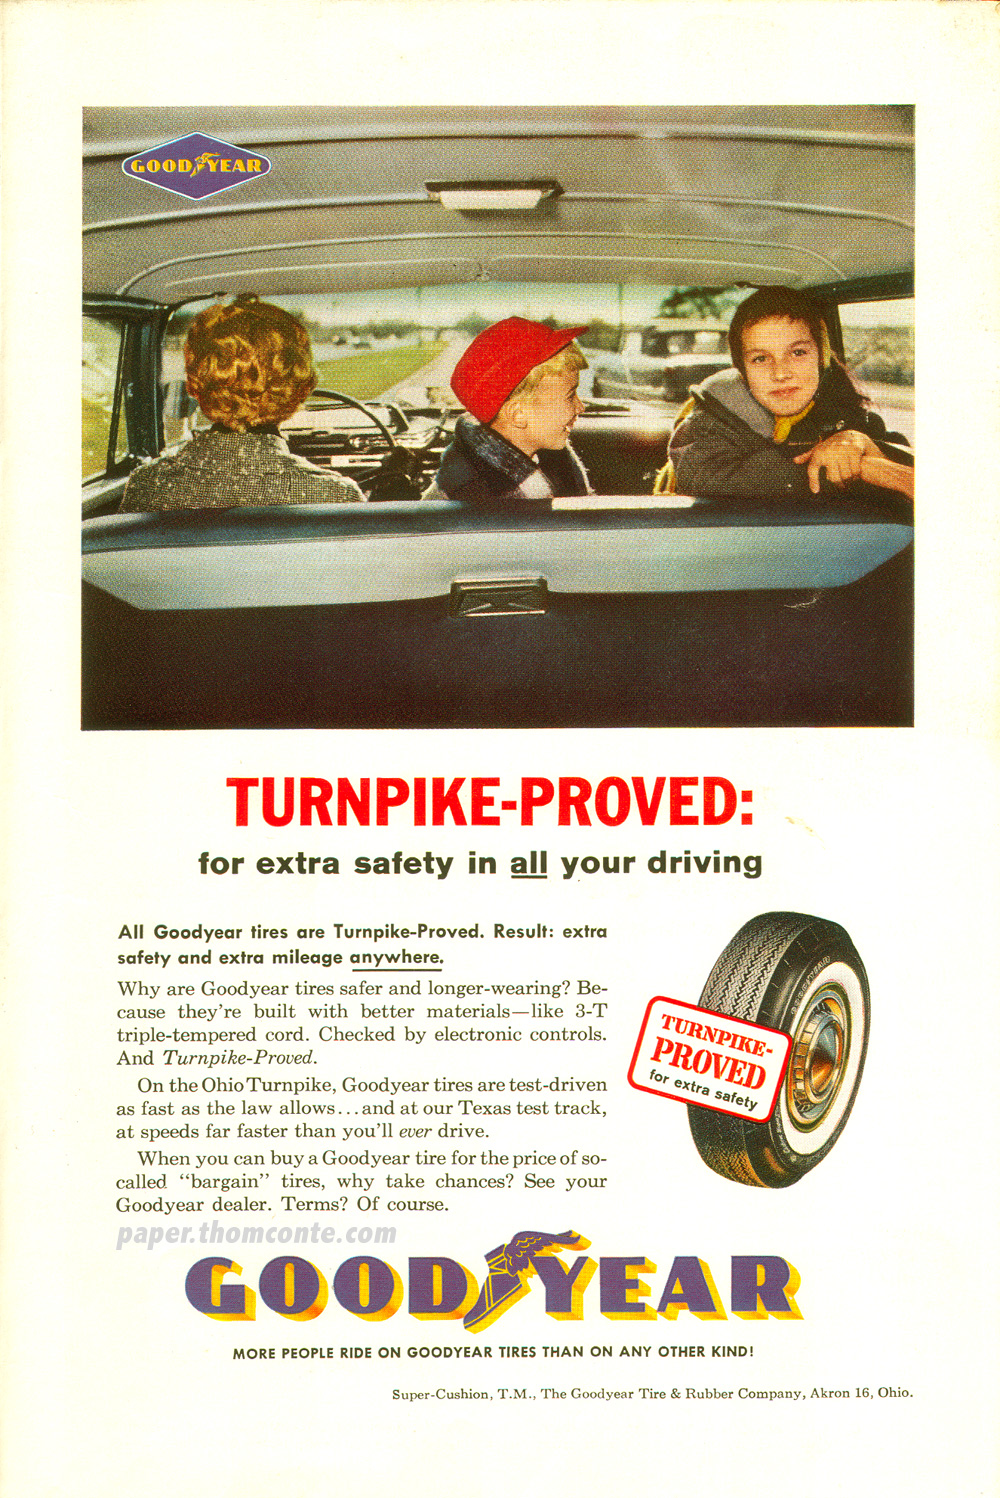 Goodyear Tires advertisement - Turnpike Proved